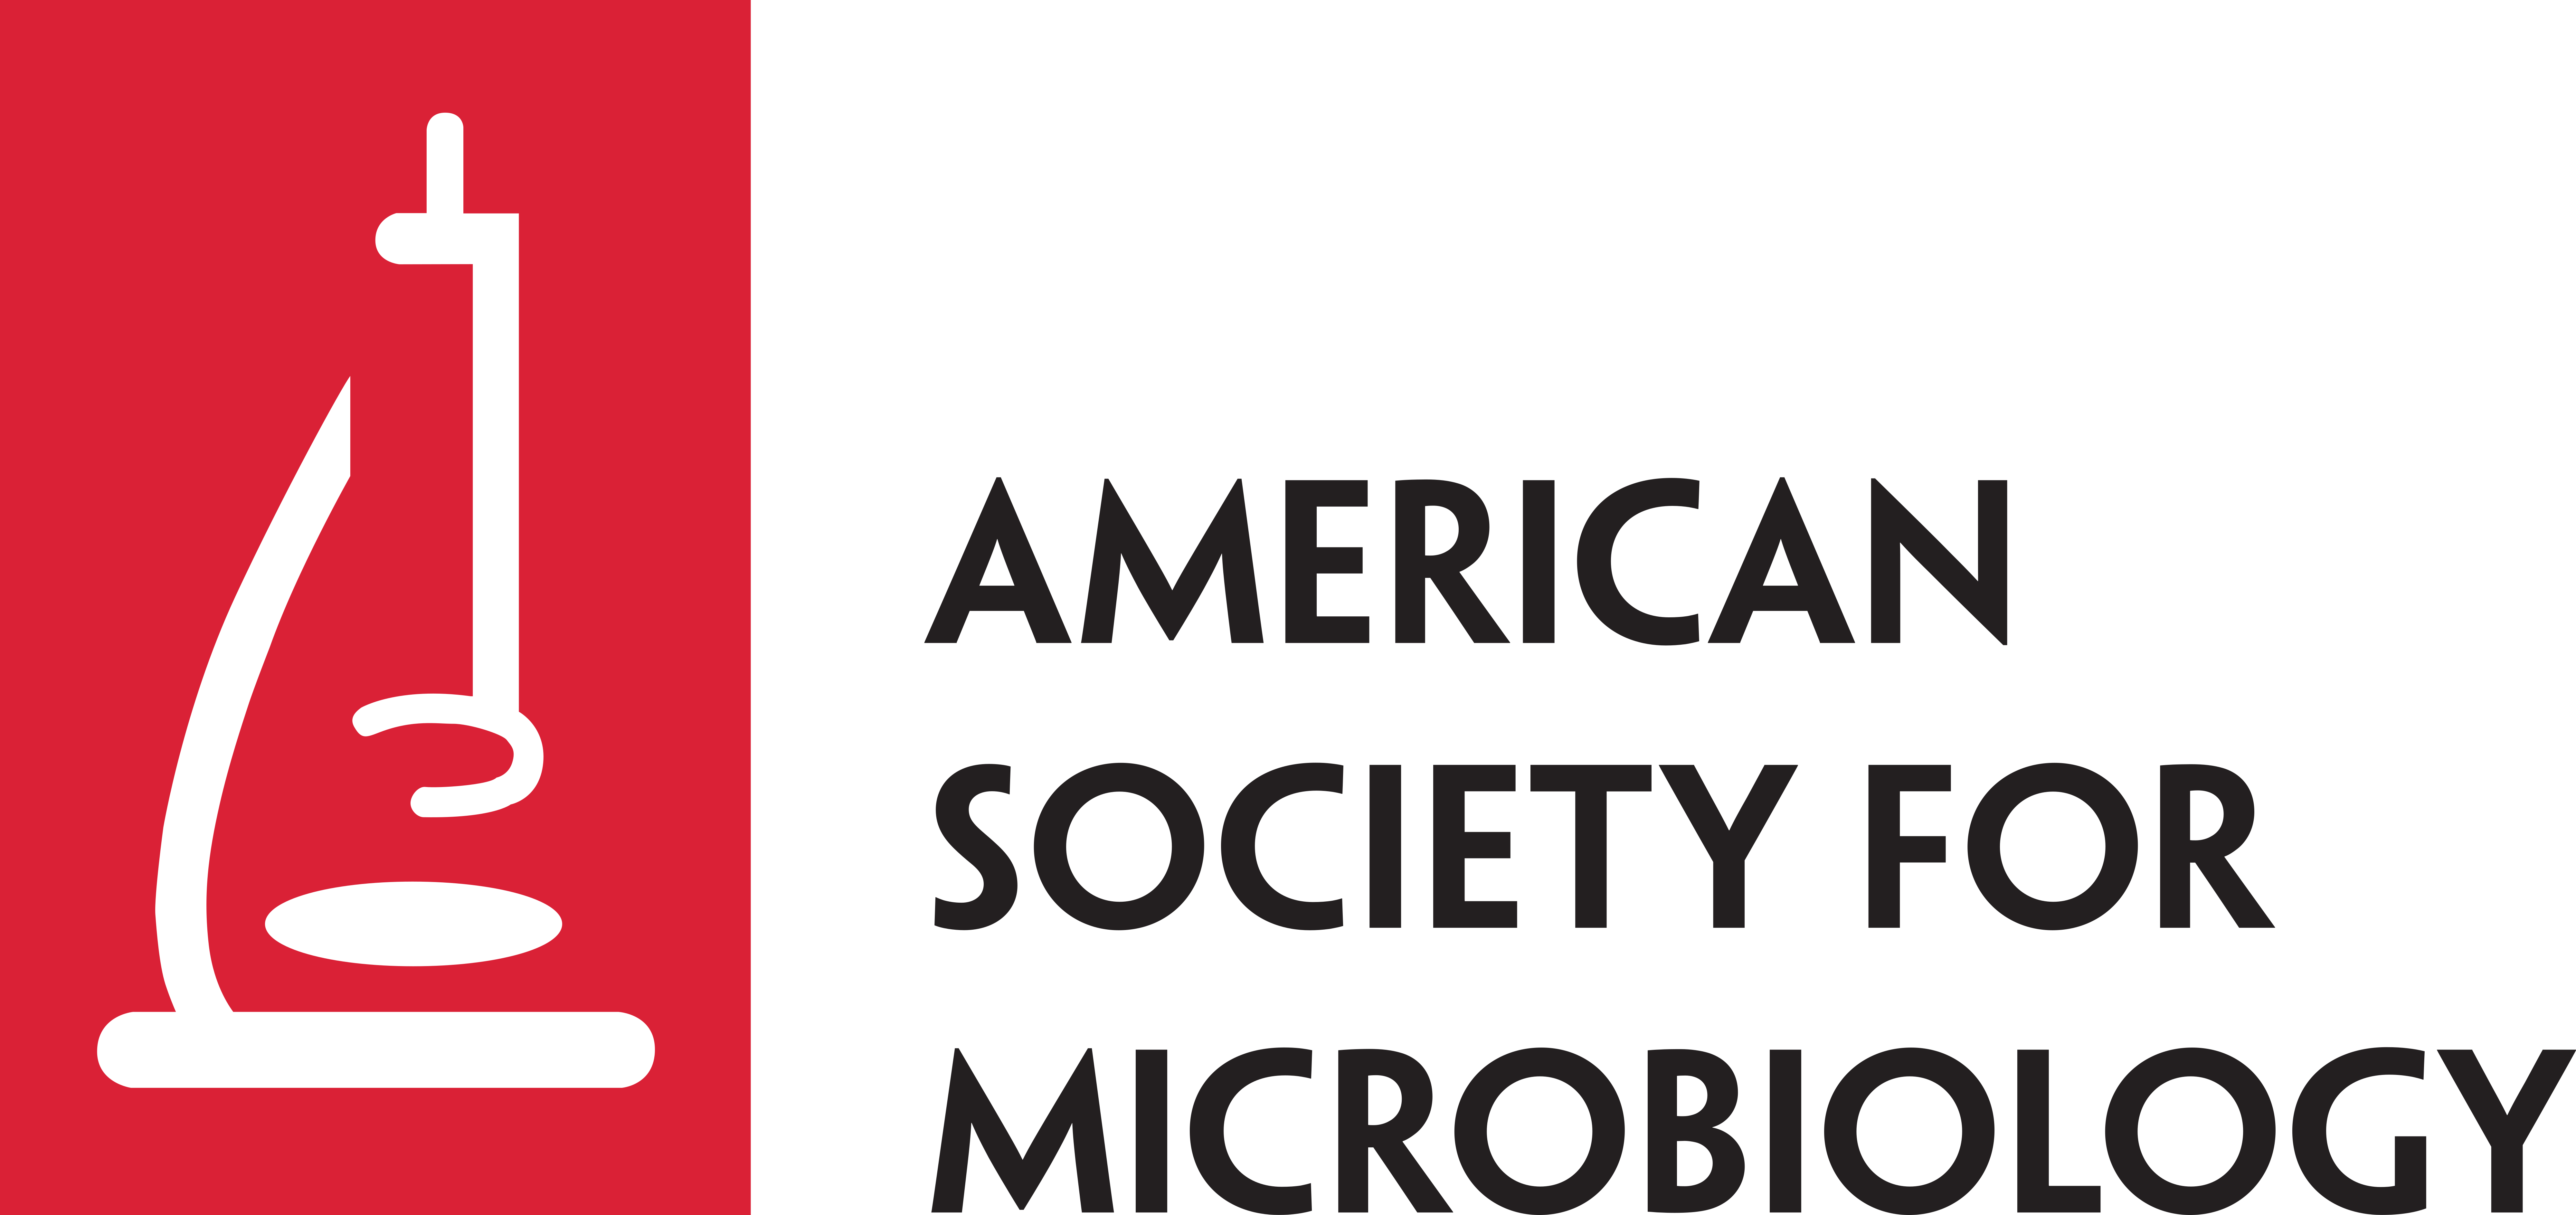 American Society for Microbiologists Logo